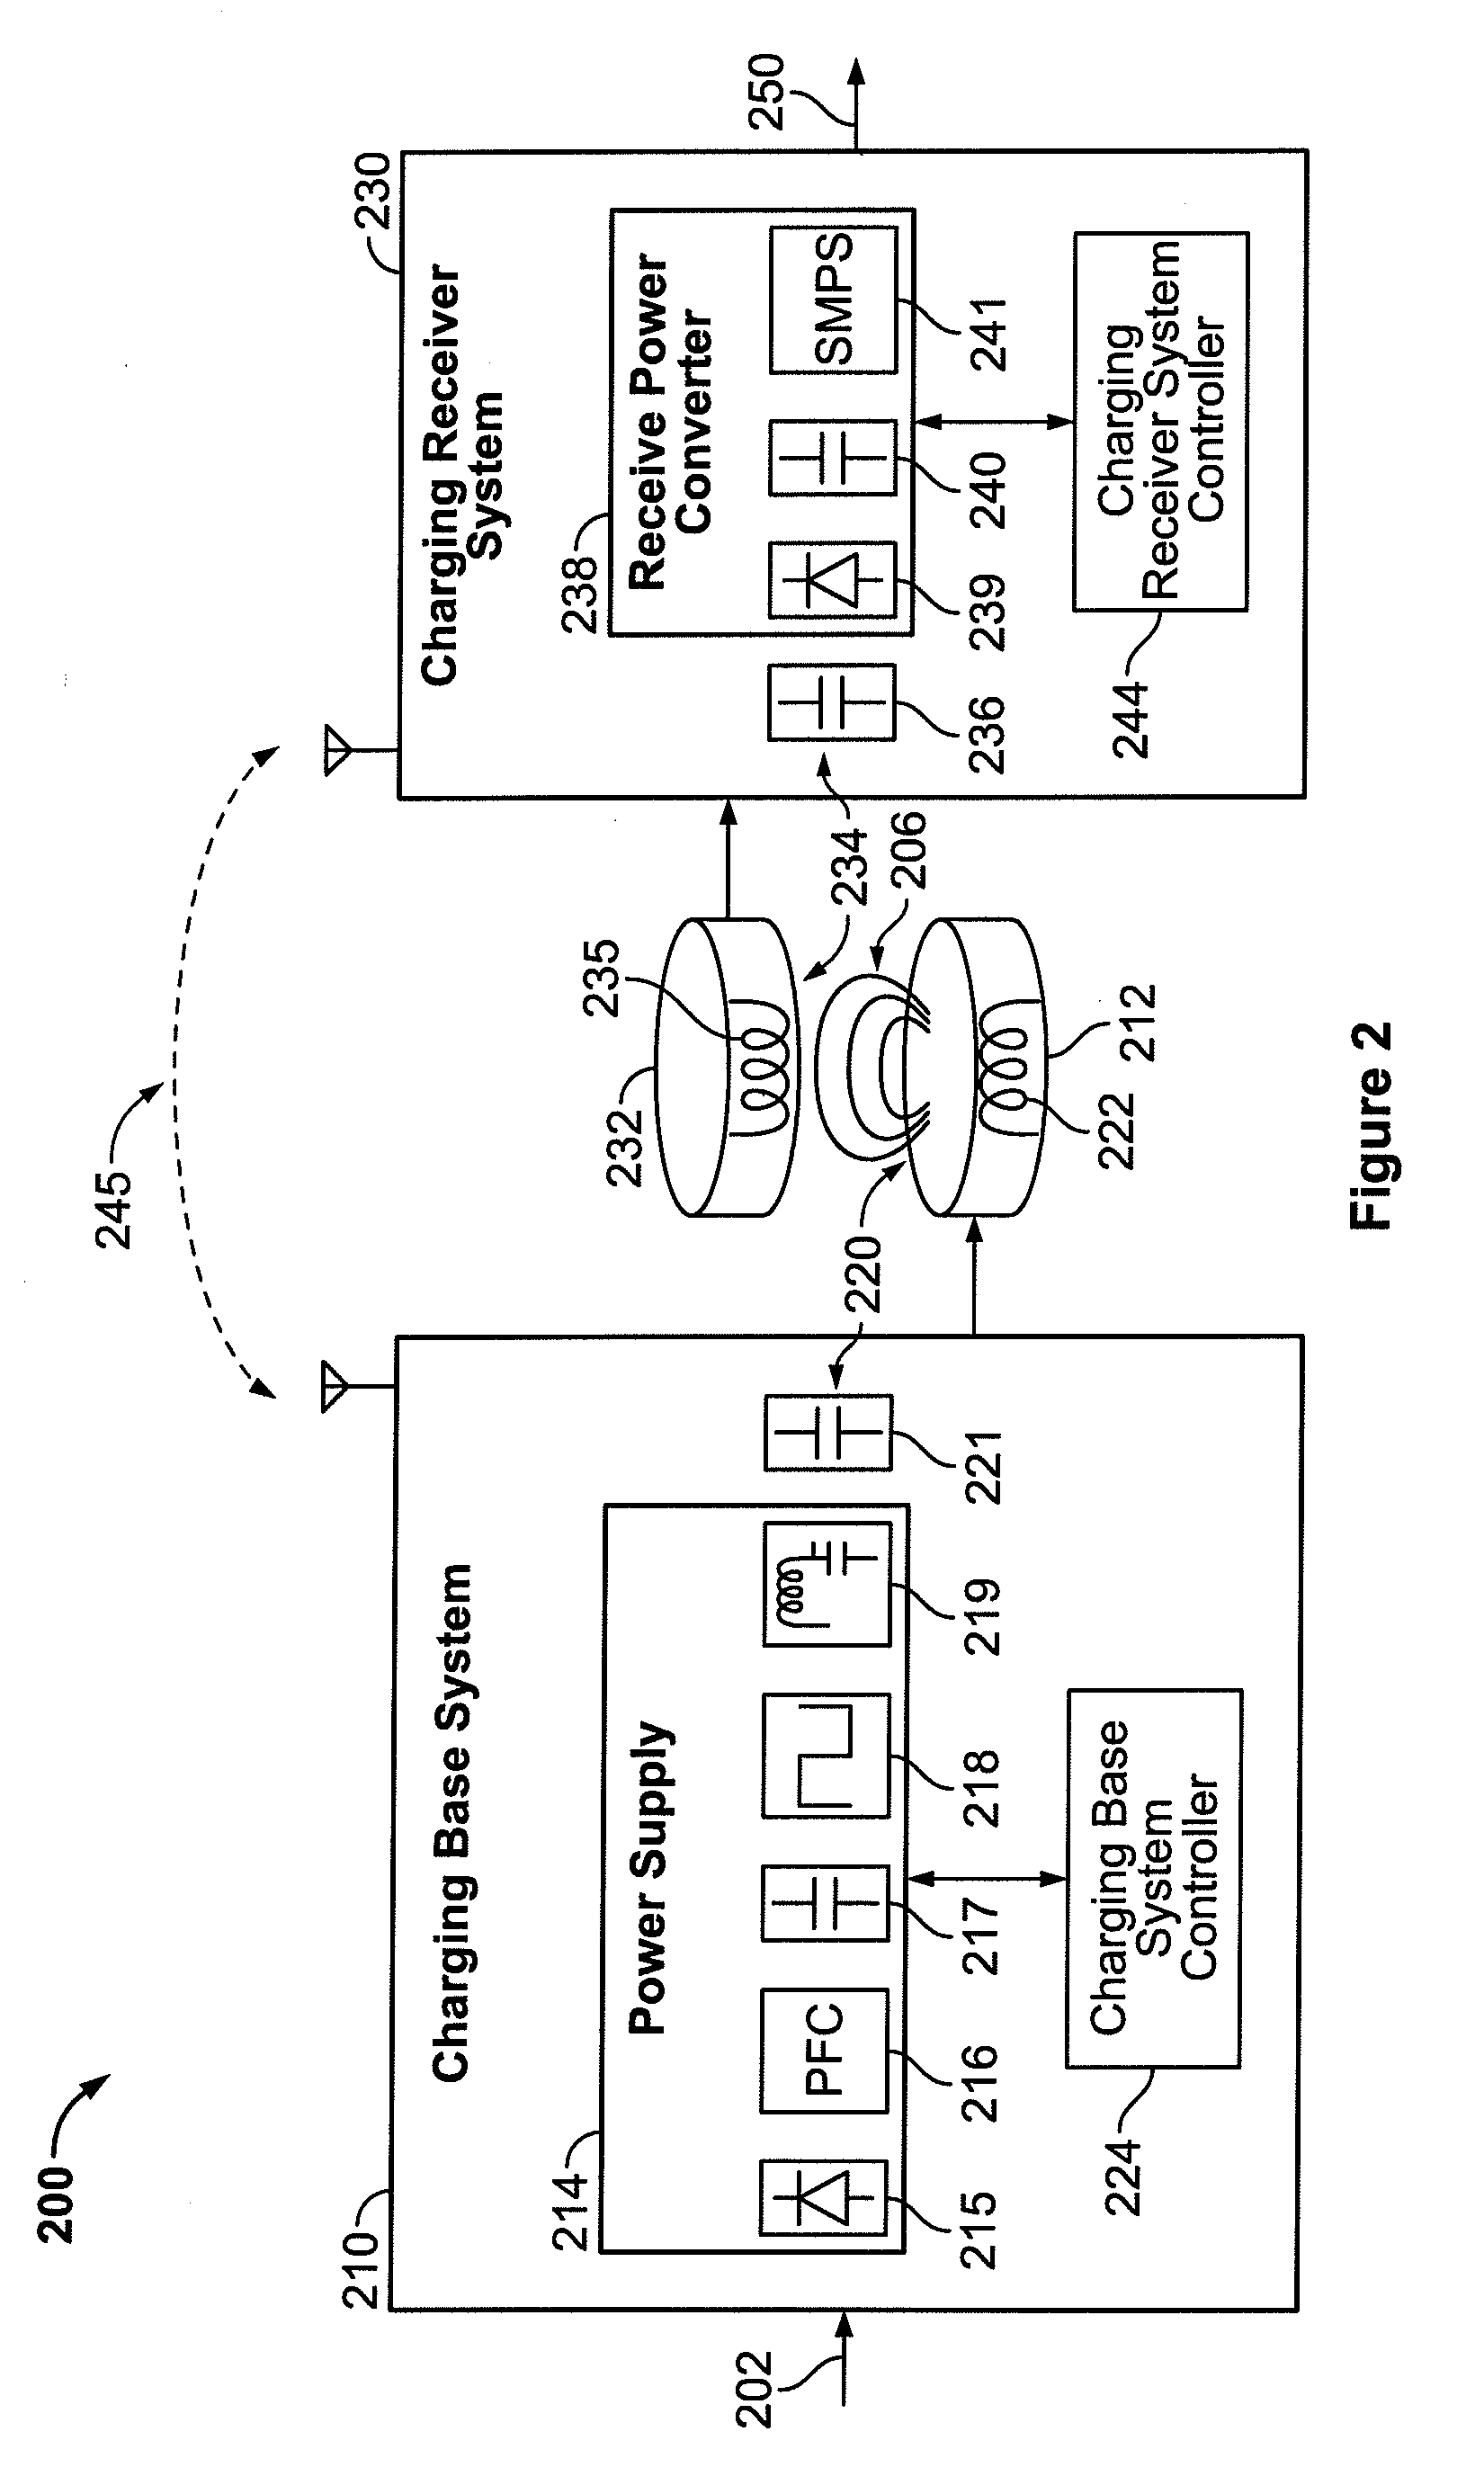 Integrated photo voltaic solar plant and electric vehicle charging station and method of operation